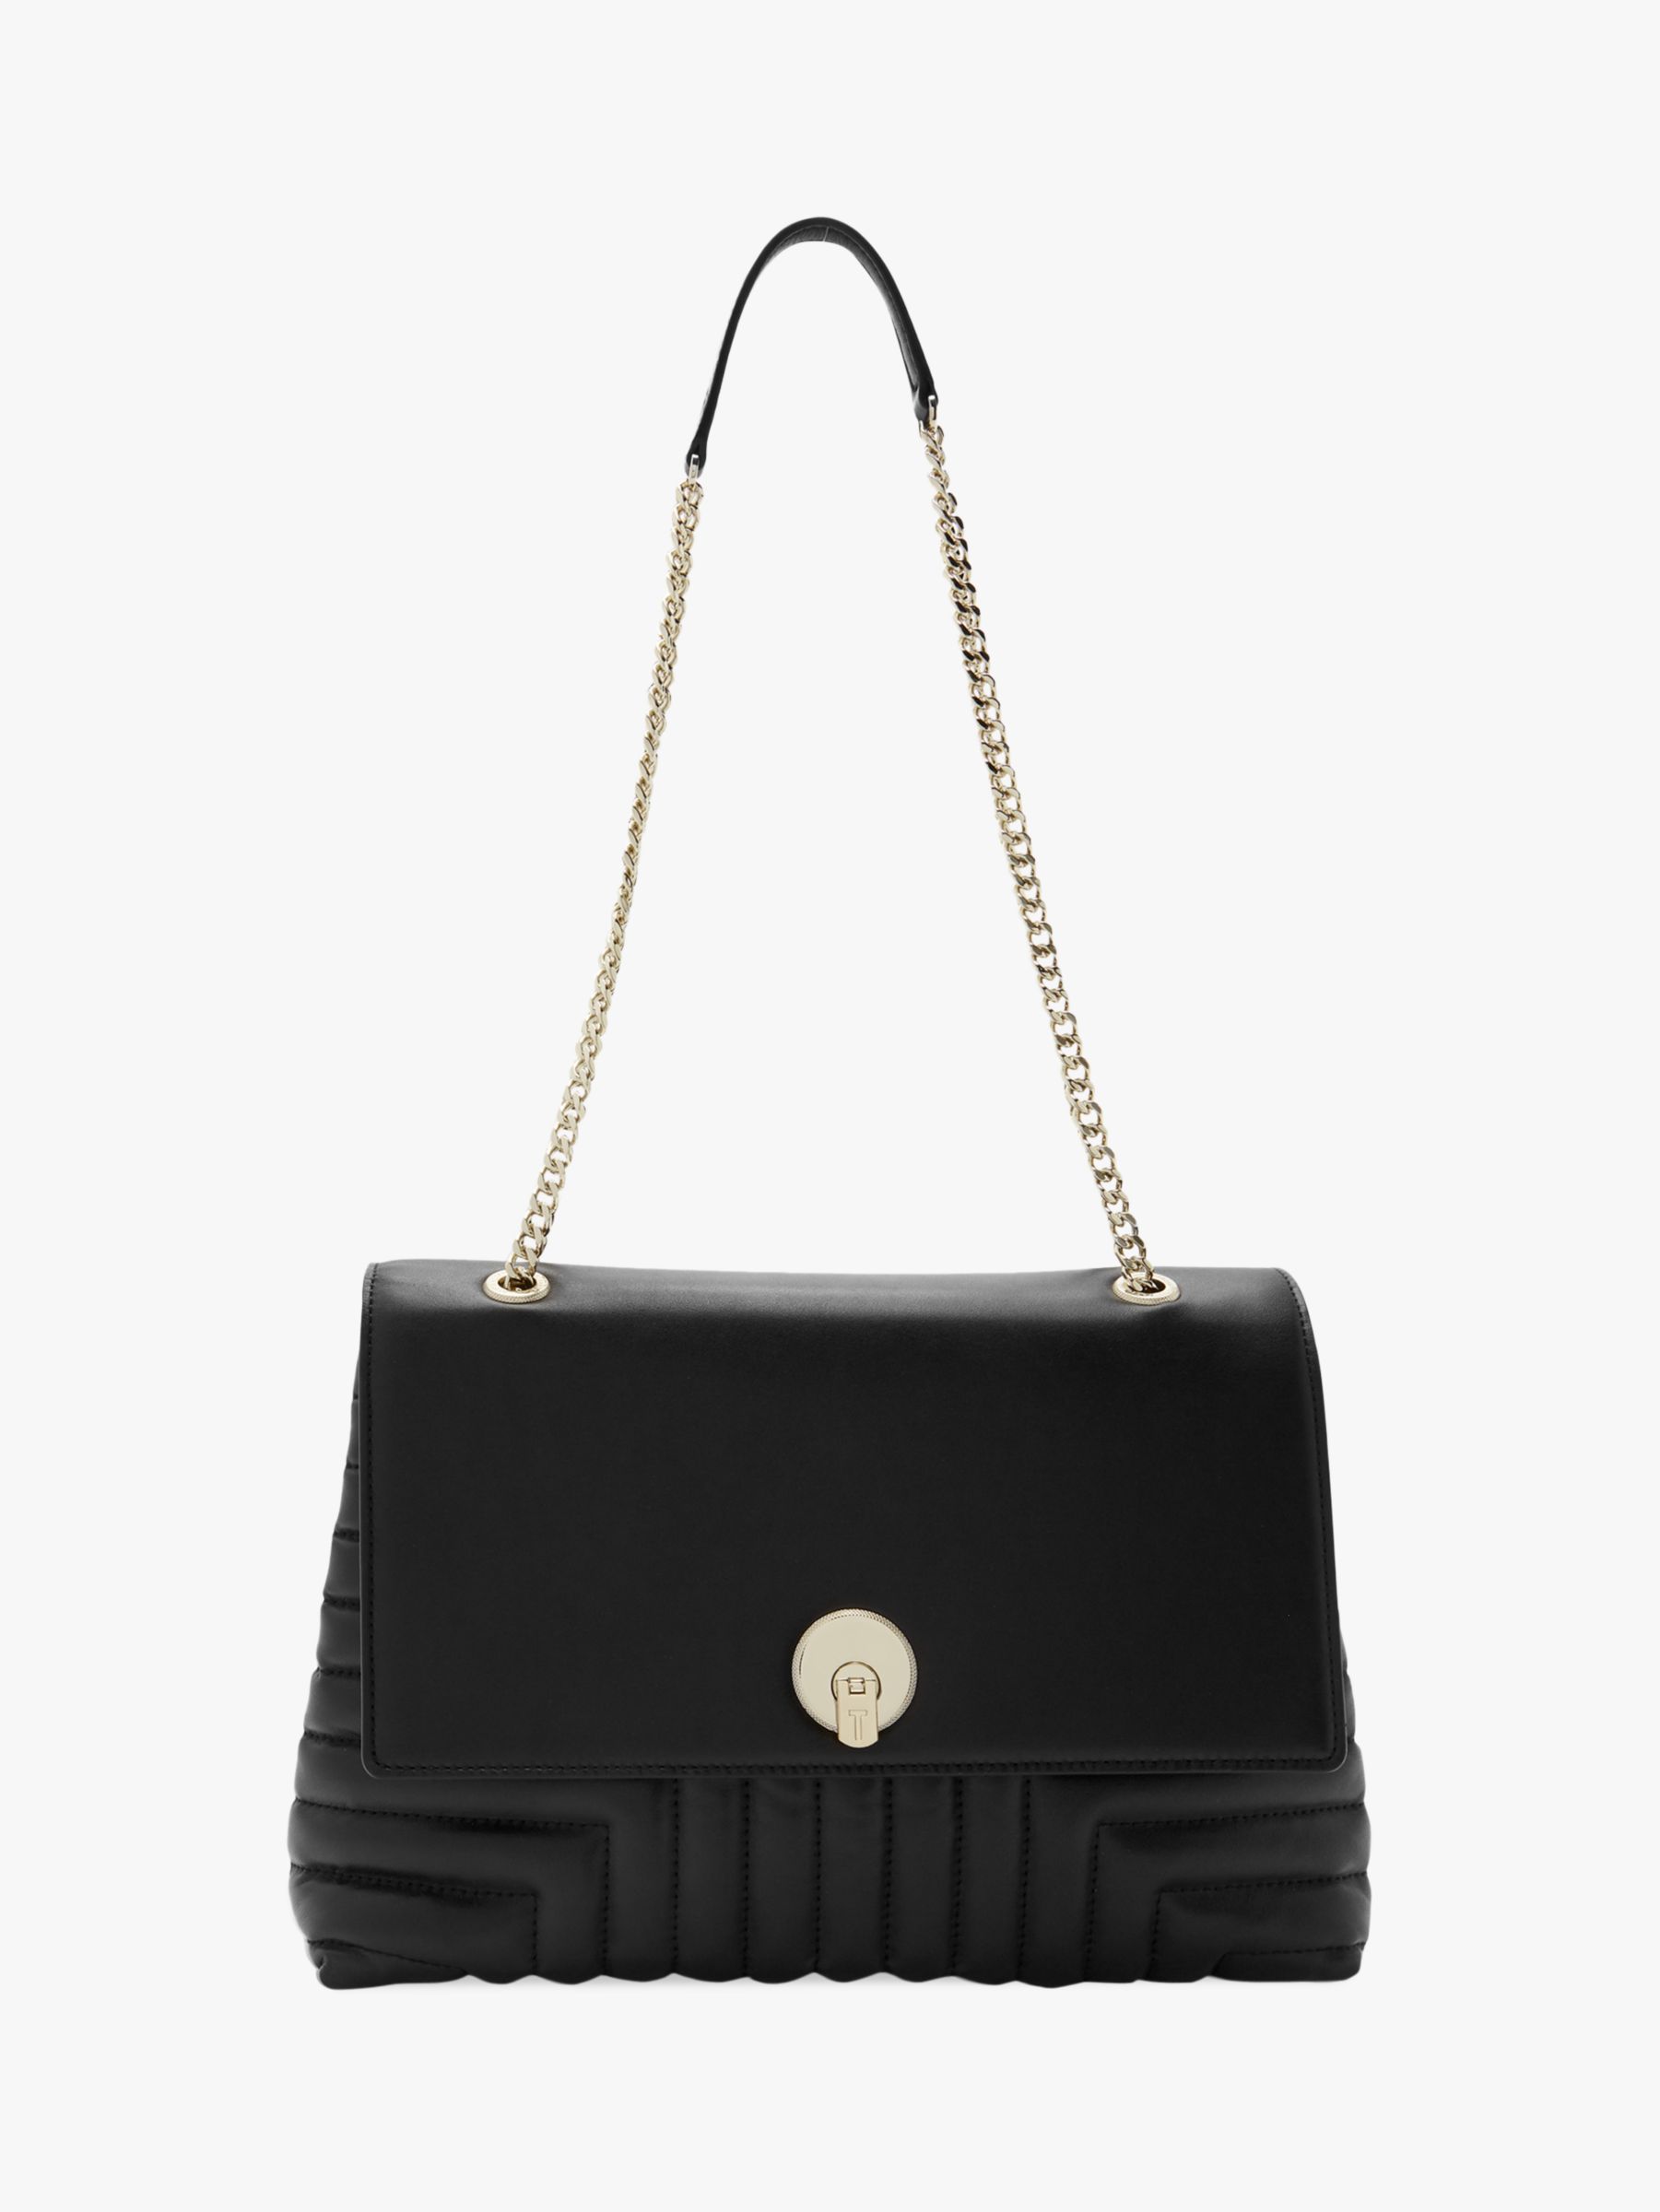 Ted Baker Sofiee Quilted Leather Shoulder Bag at John Lewis & Partners